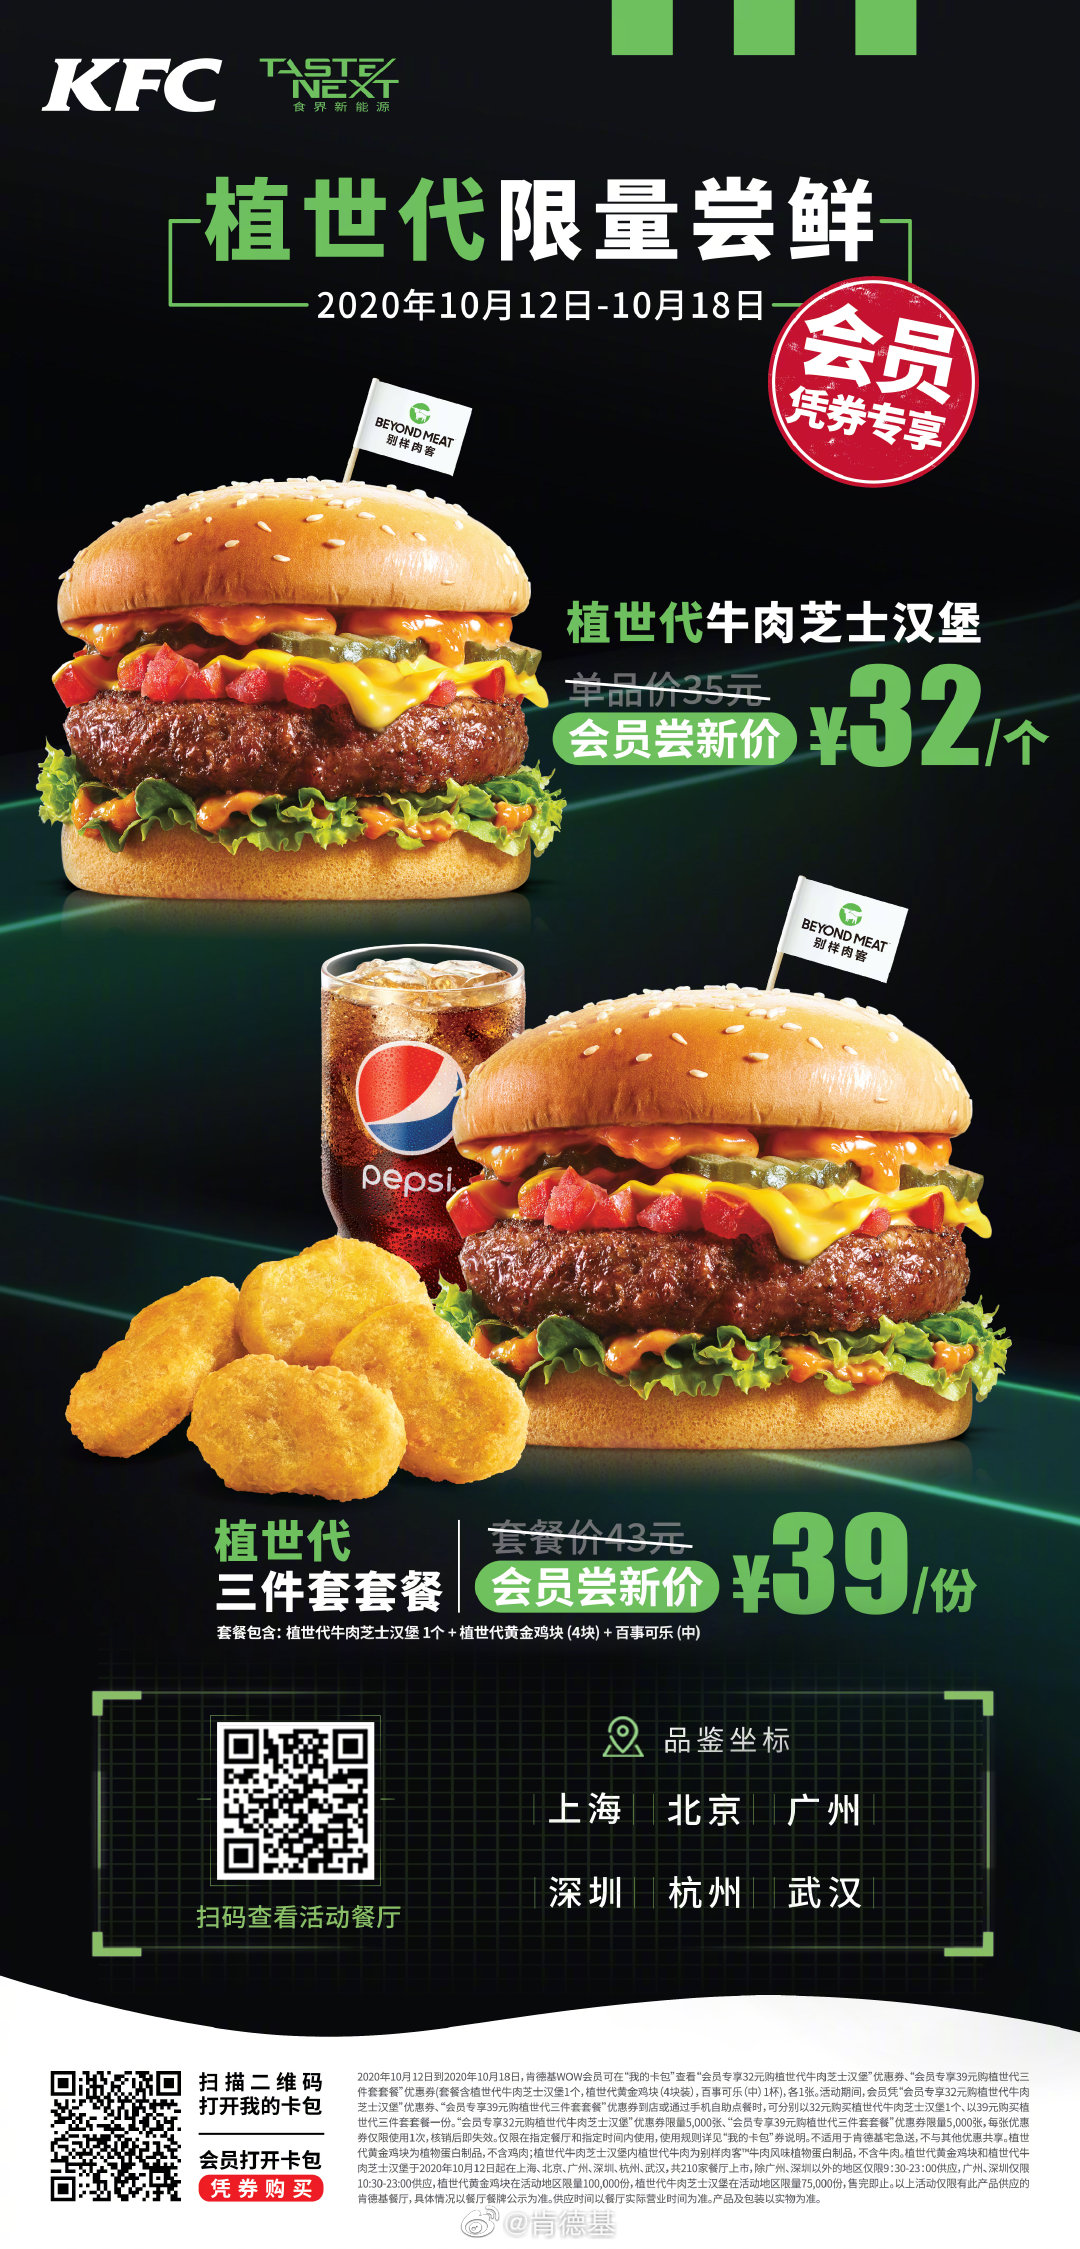 Chinese KFC launches vegetable meat burgers